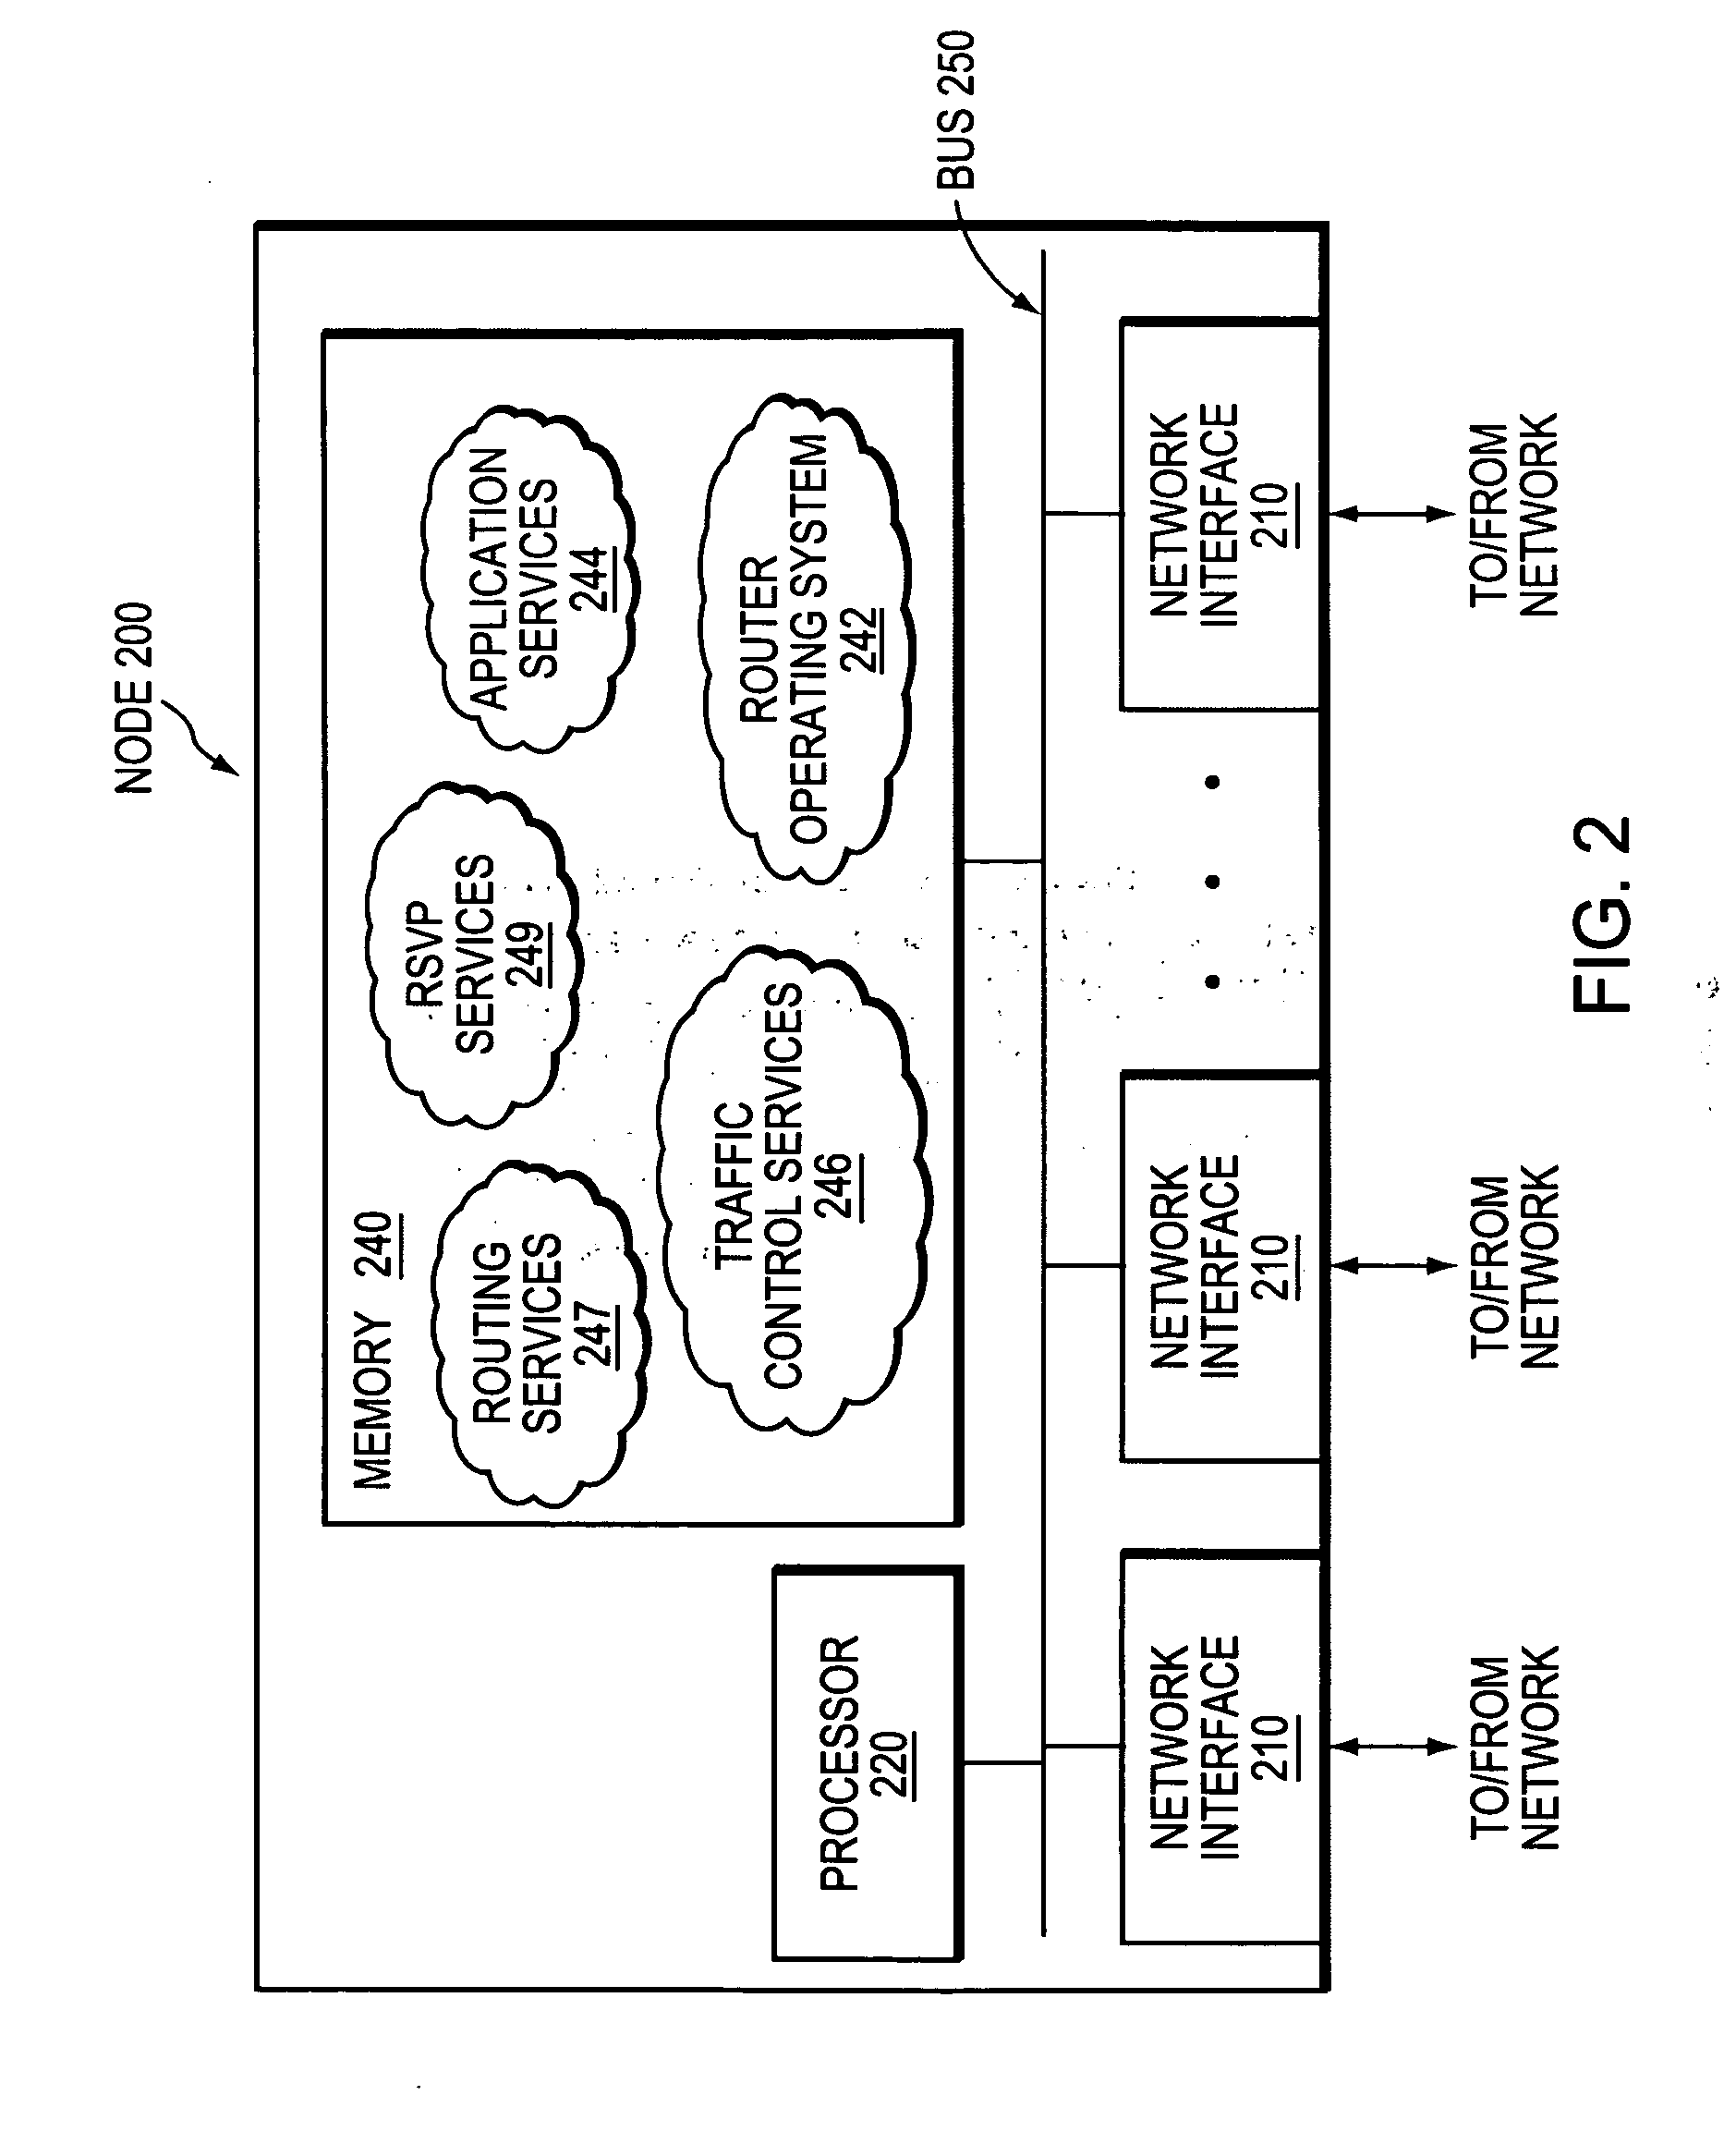 Facilitating application synchronization with a reservation protocol at a sender without application receiver participation